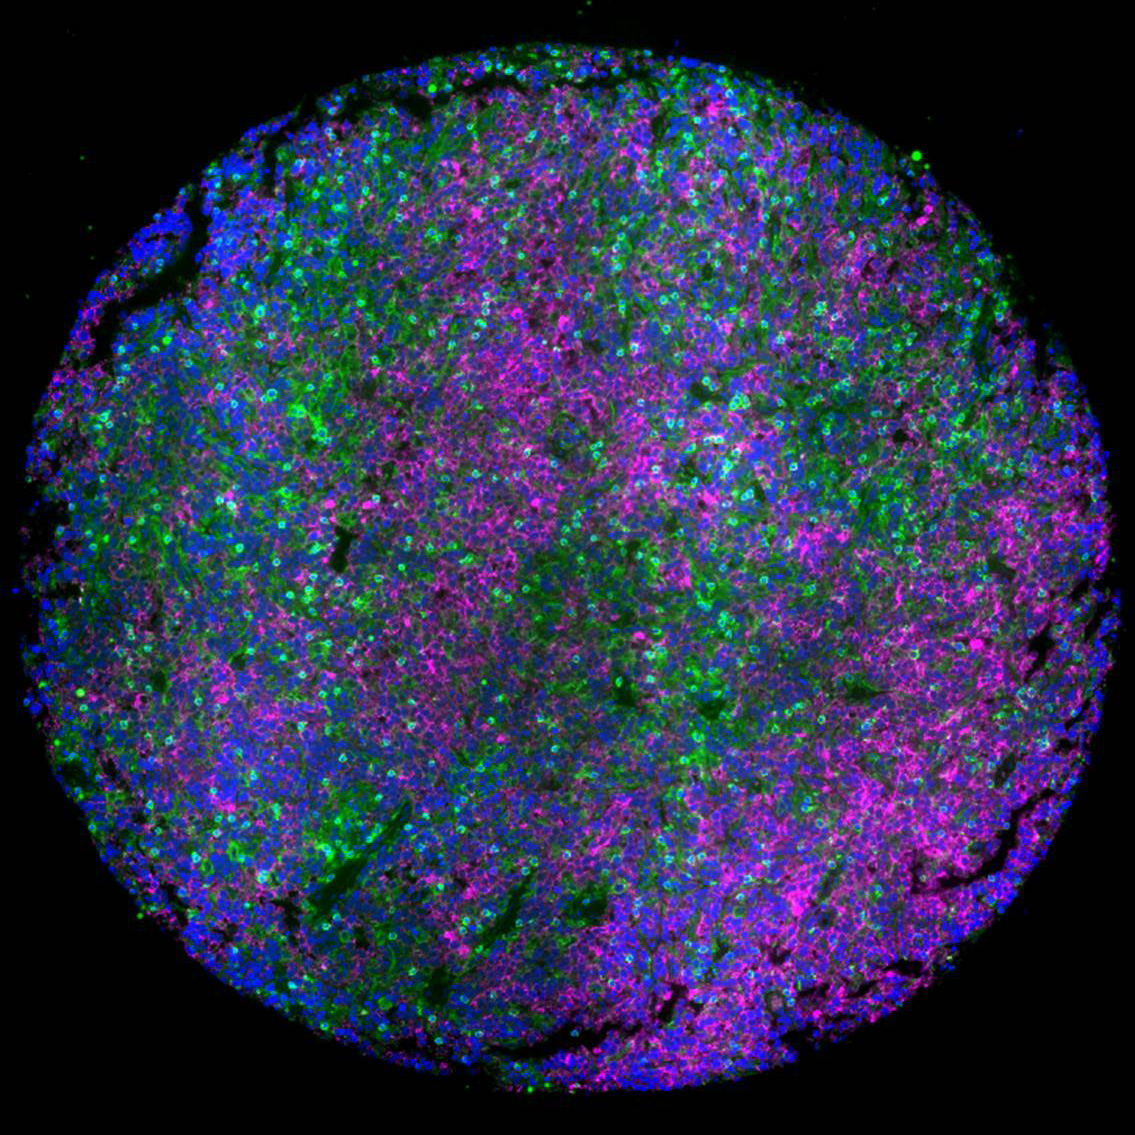 Lymph node tumor microenvironment of lymphomas with malignant B cells (magenta) surrounded by T cells (green)